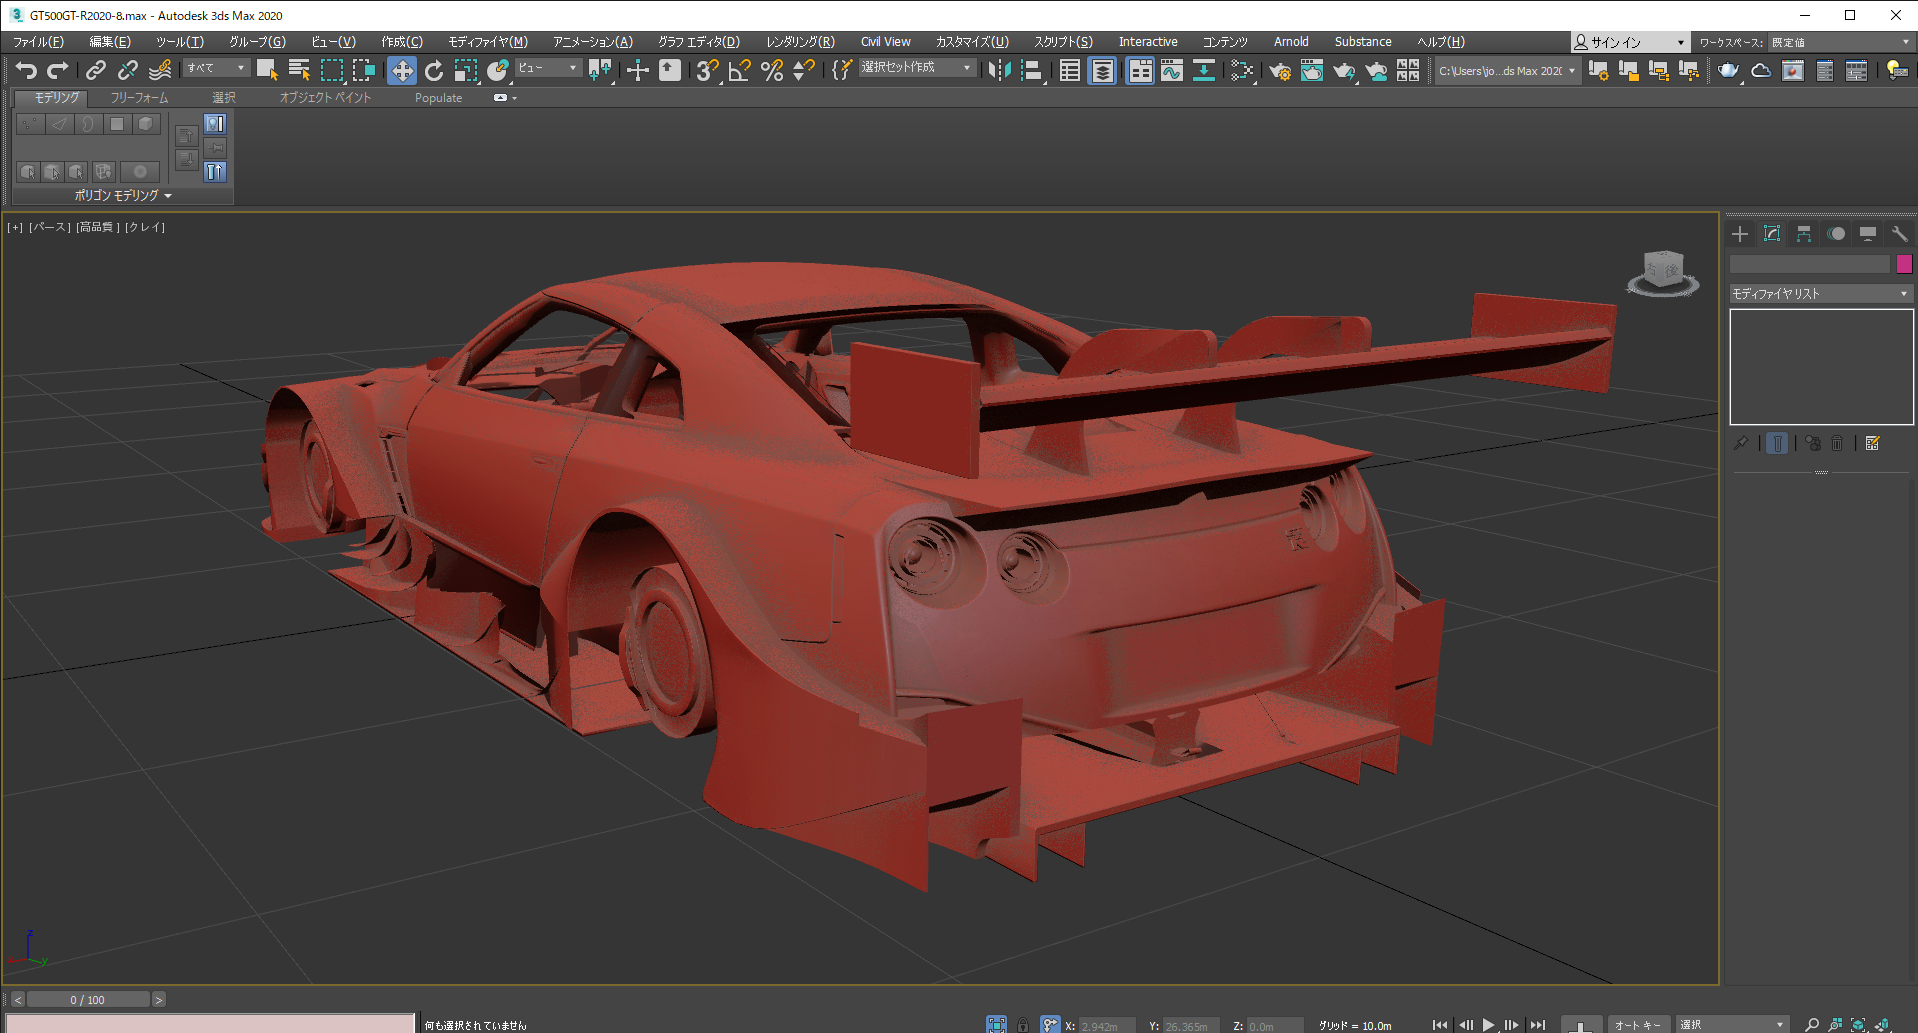 GT500GT-R2020-8.max - Autodesk 3ds Max 2020  2020_03_31 13_06_57.png